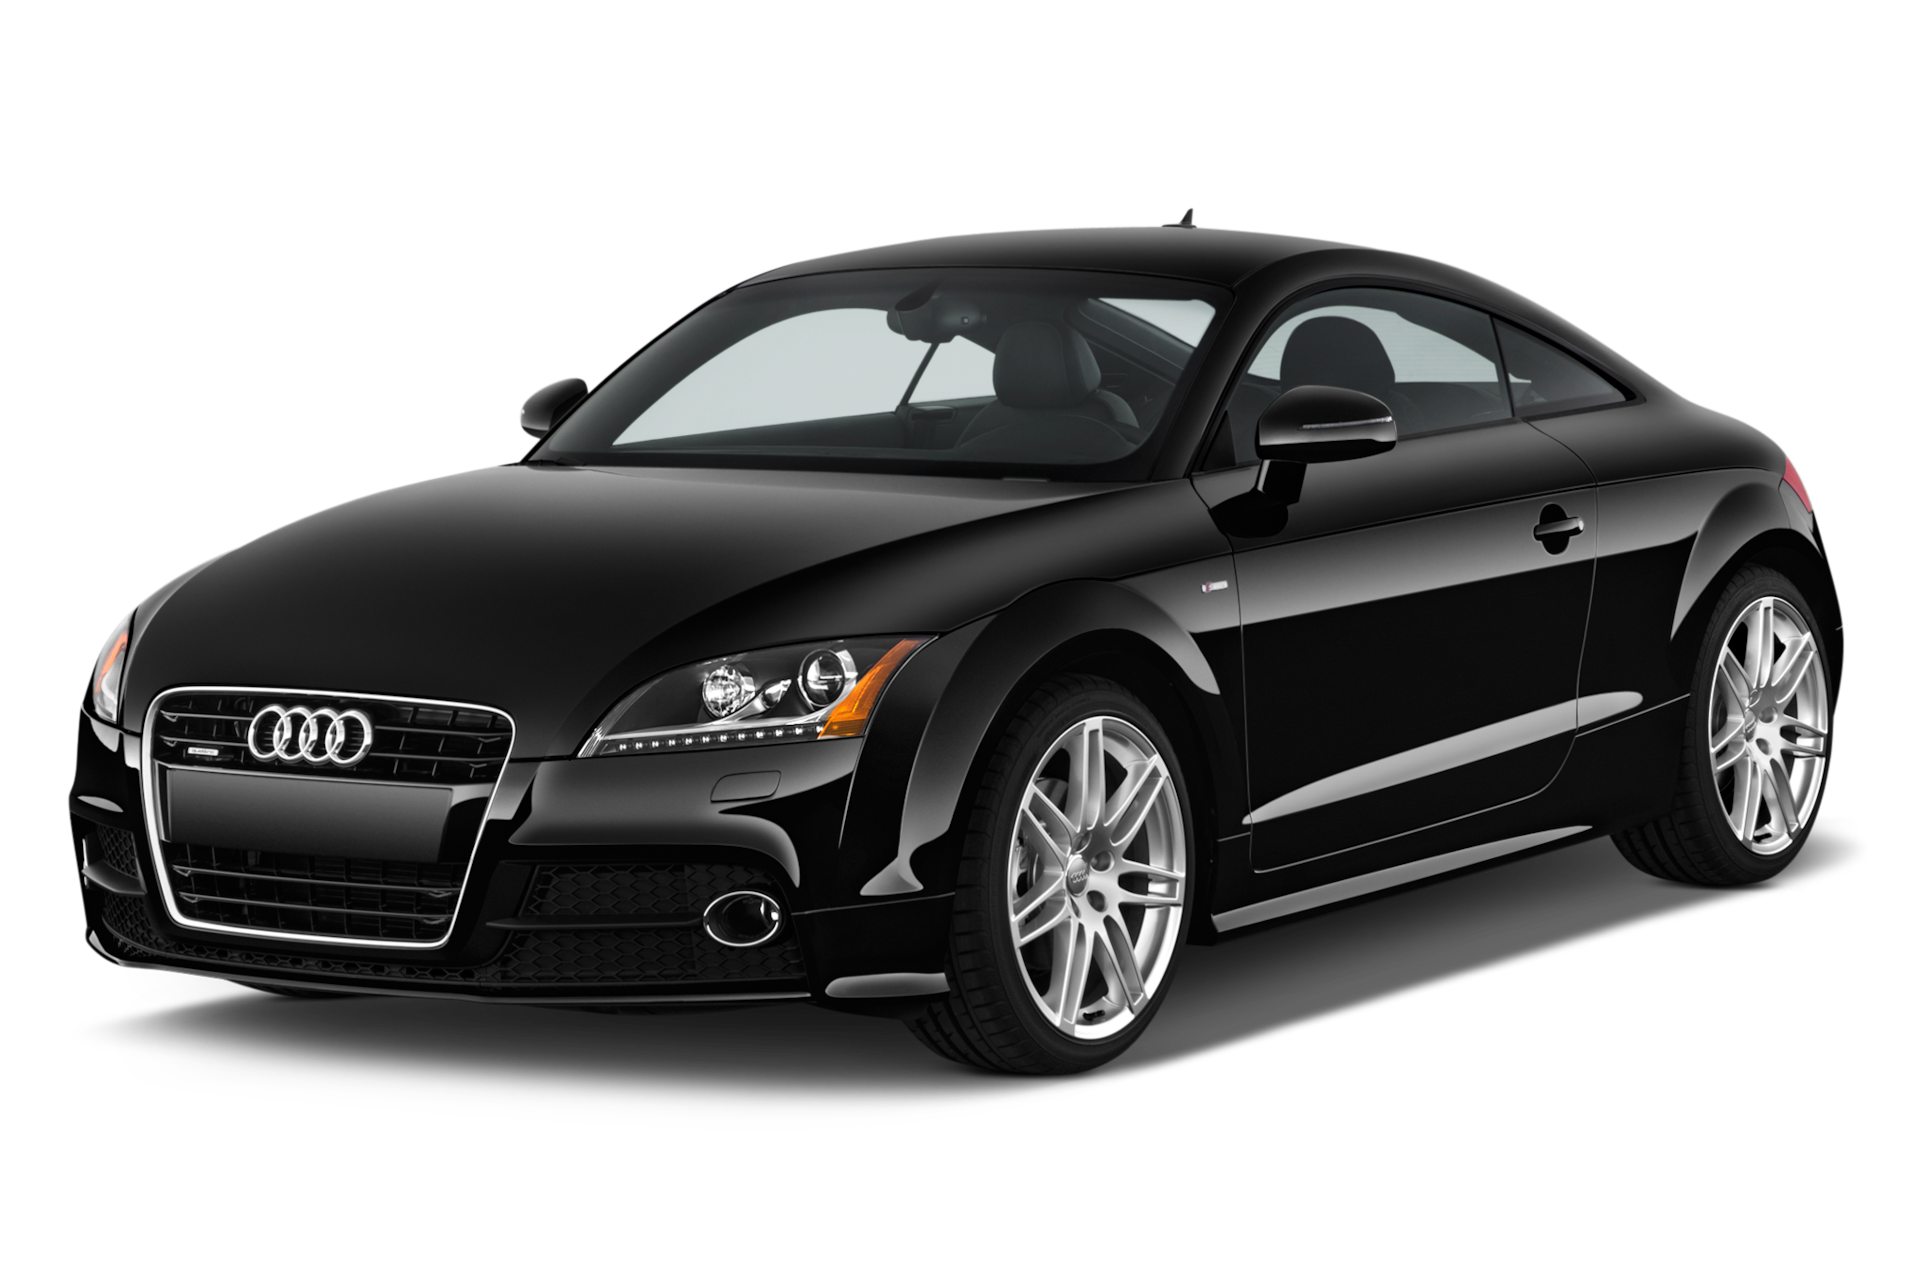 2013 Audi TT Prices, Reviews, and Photos - MotorTrend